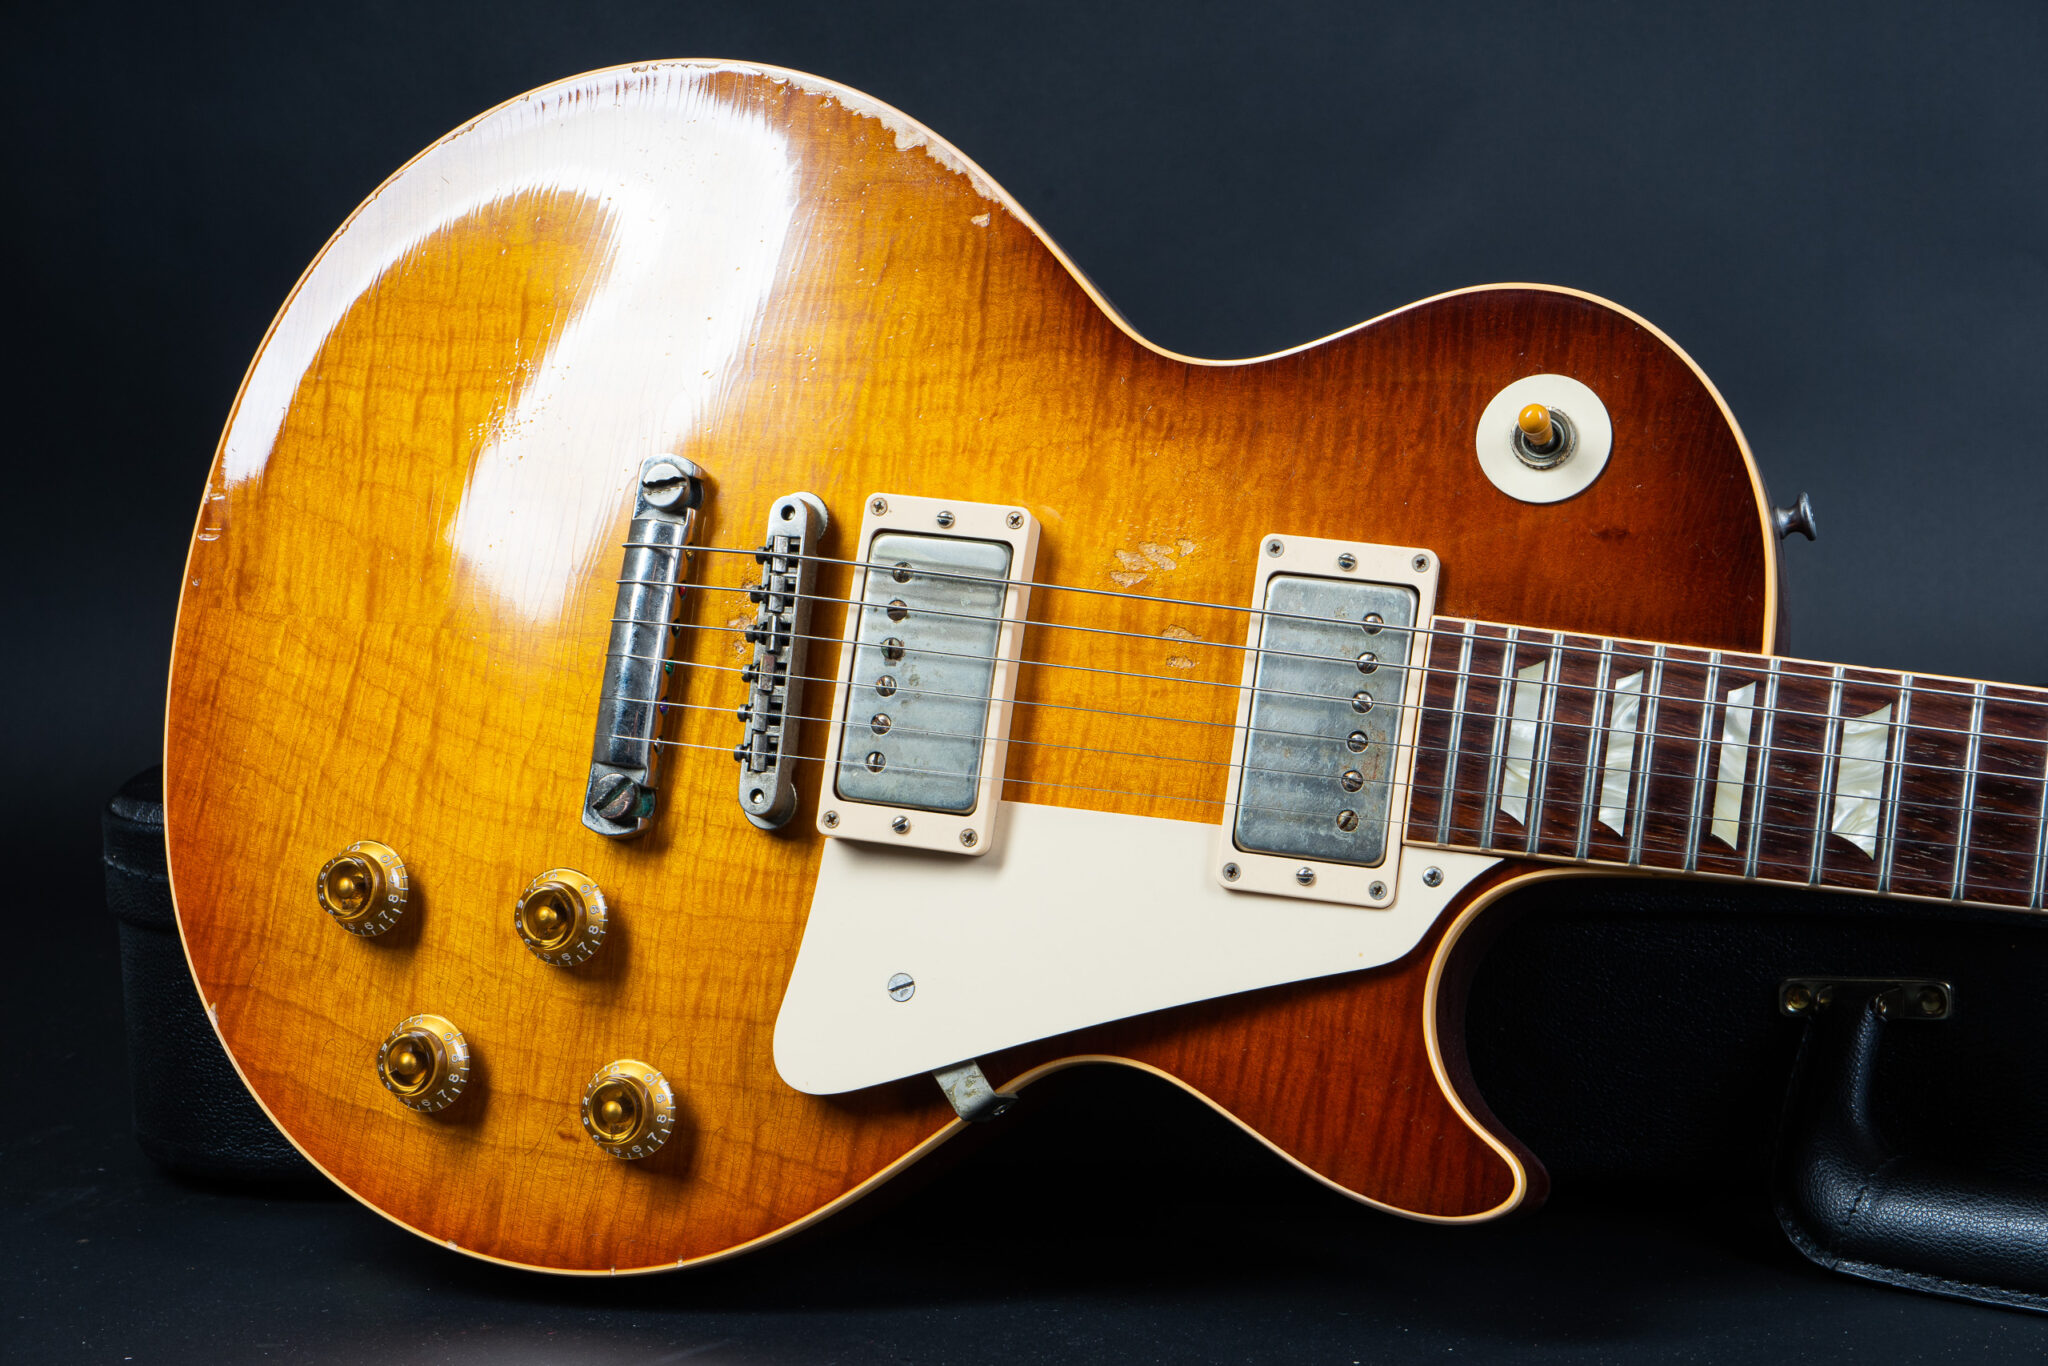 https://guitarpoint.de/app/uploads/products/2009-gibson-les-paul-billy-gibbons-pearly-gates-tom-murphy-aged/2009-Gibson-Les-Paul-Pearly-Gates-Aged030-9-2048x1366.jpg